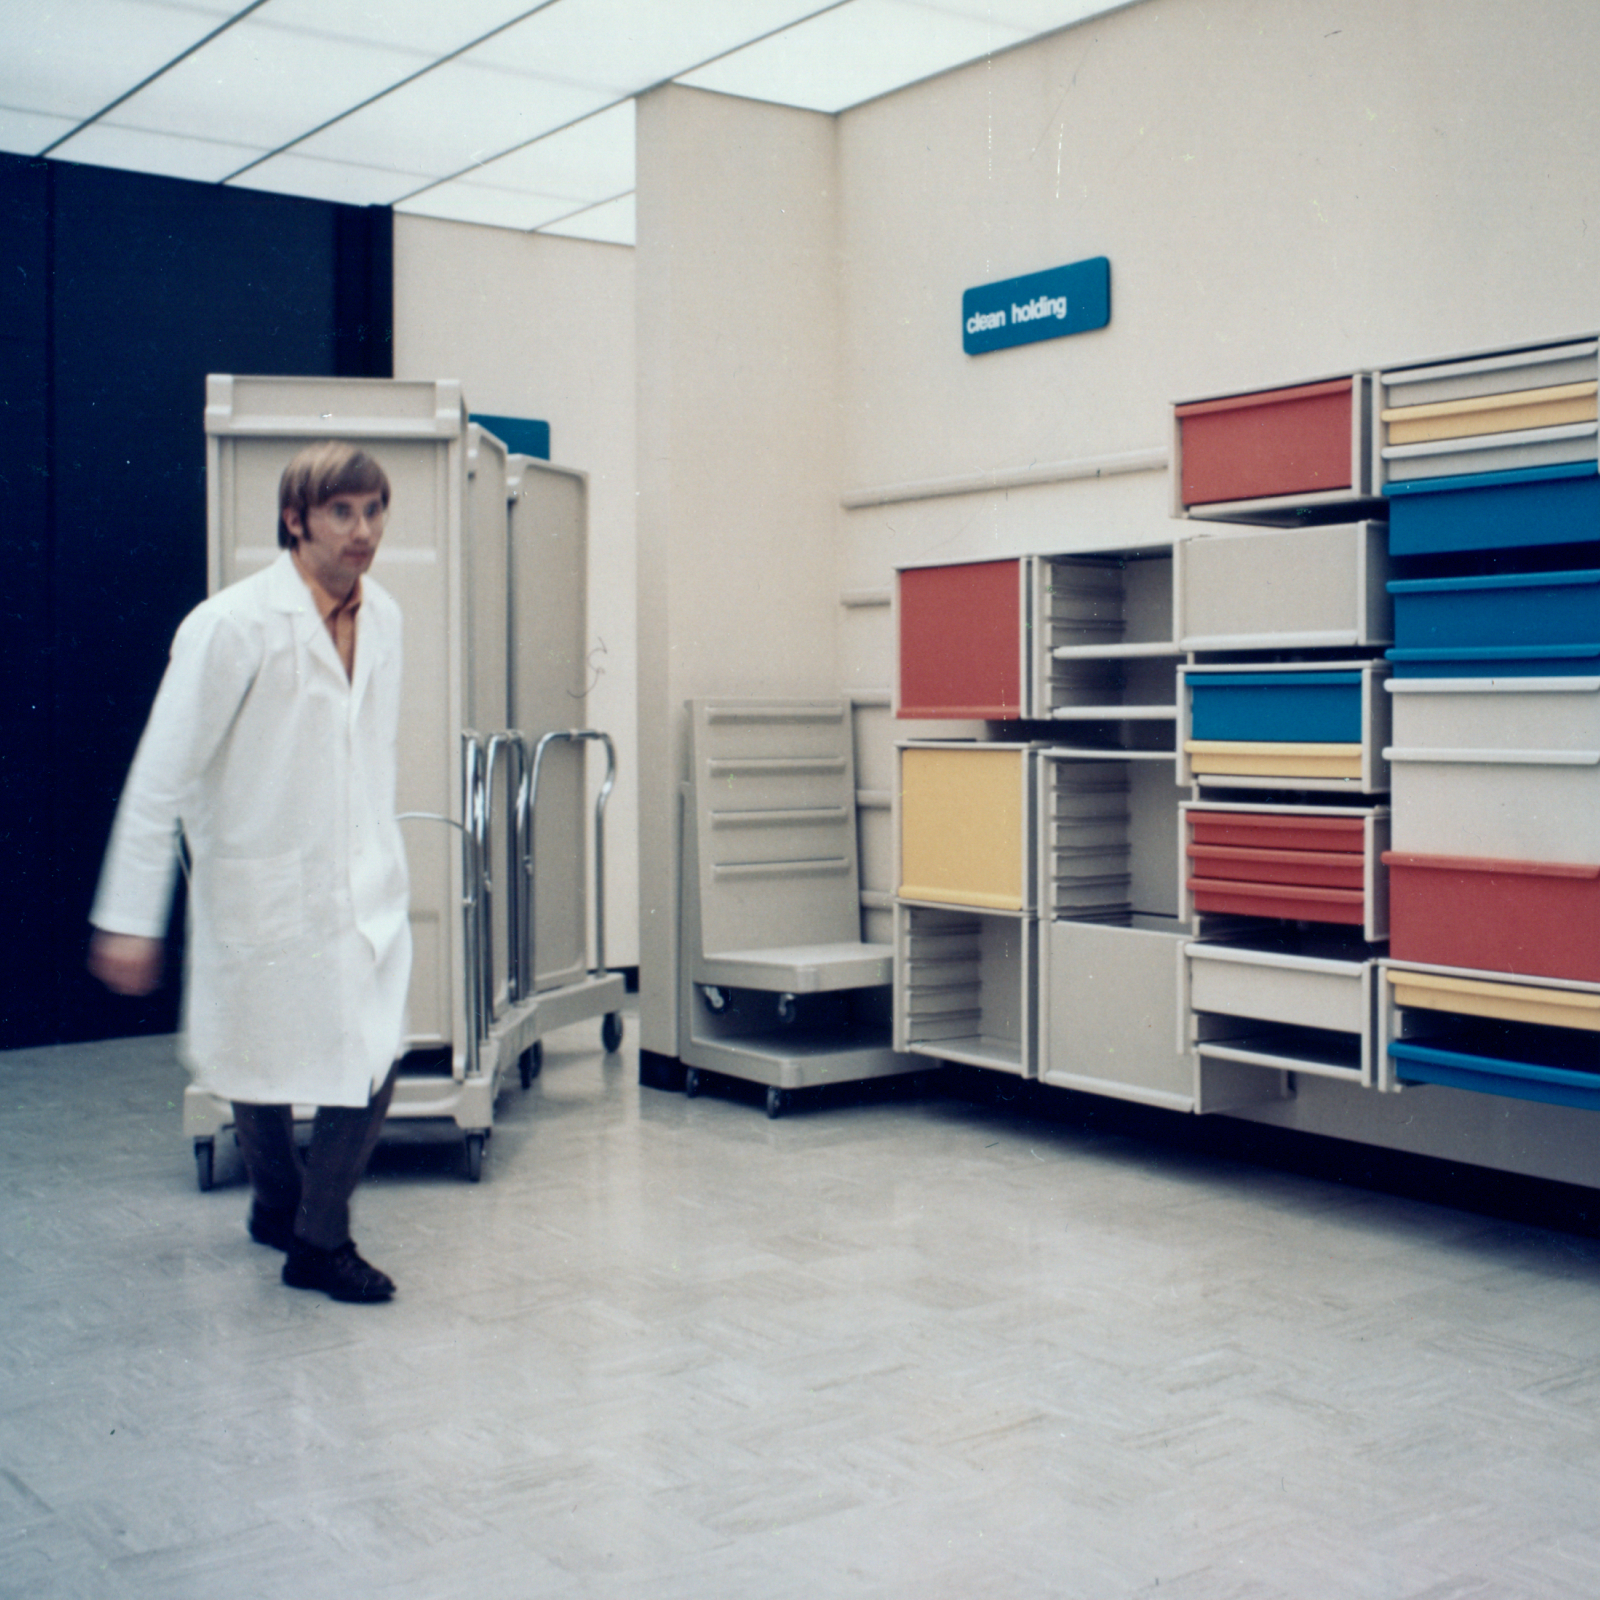 Archival photo of a man in white lab coat pulling Co/Struc lockers on transport cart in motion. Co/Struc wall-mounted open lockers with drawers in red, yellow, blue, and white background. Blue sign on the wall with white lettering that says 'clean holding.'